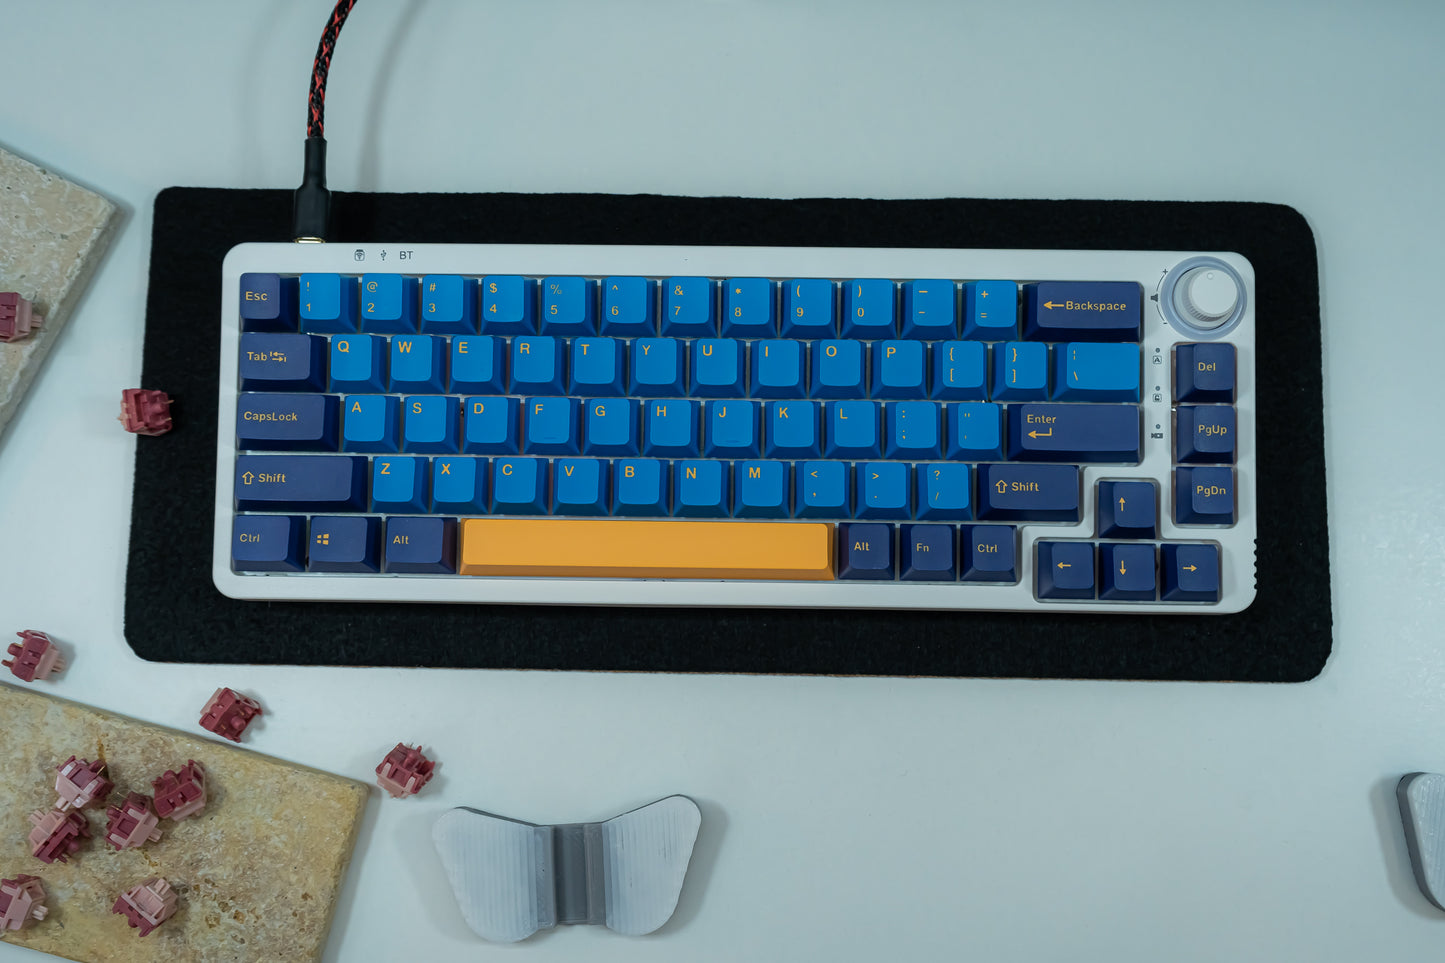 KF068 WITH PBT MACAW KEYCAPS / WIRELESS ASSEMBLED 65% HOT-SWAP MECHANICAL KEYBOARD